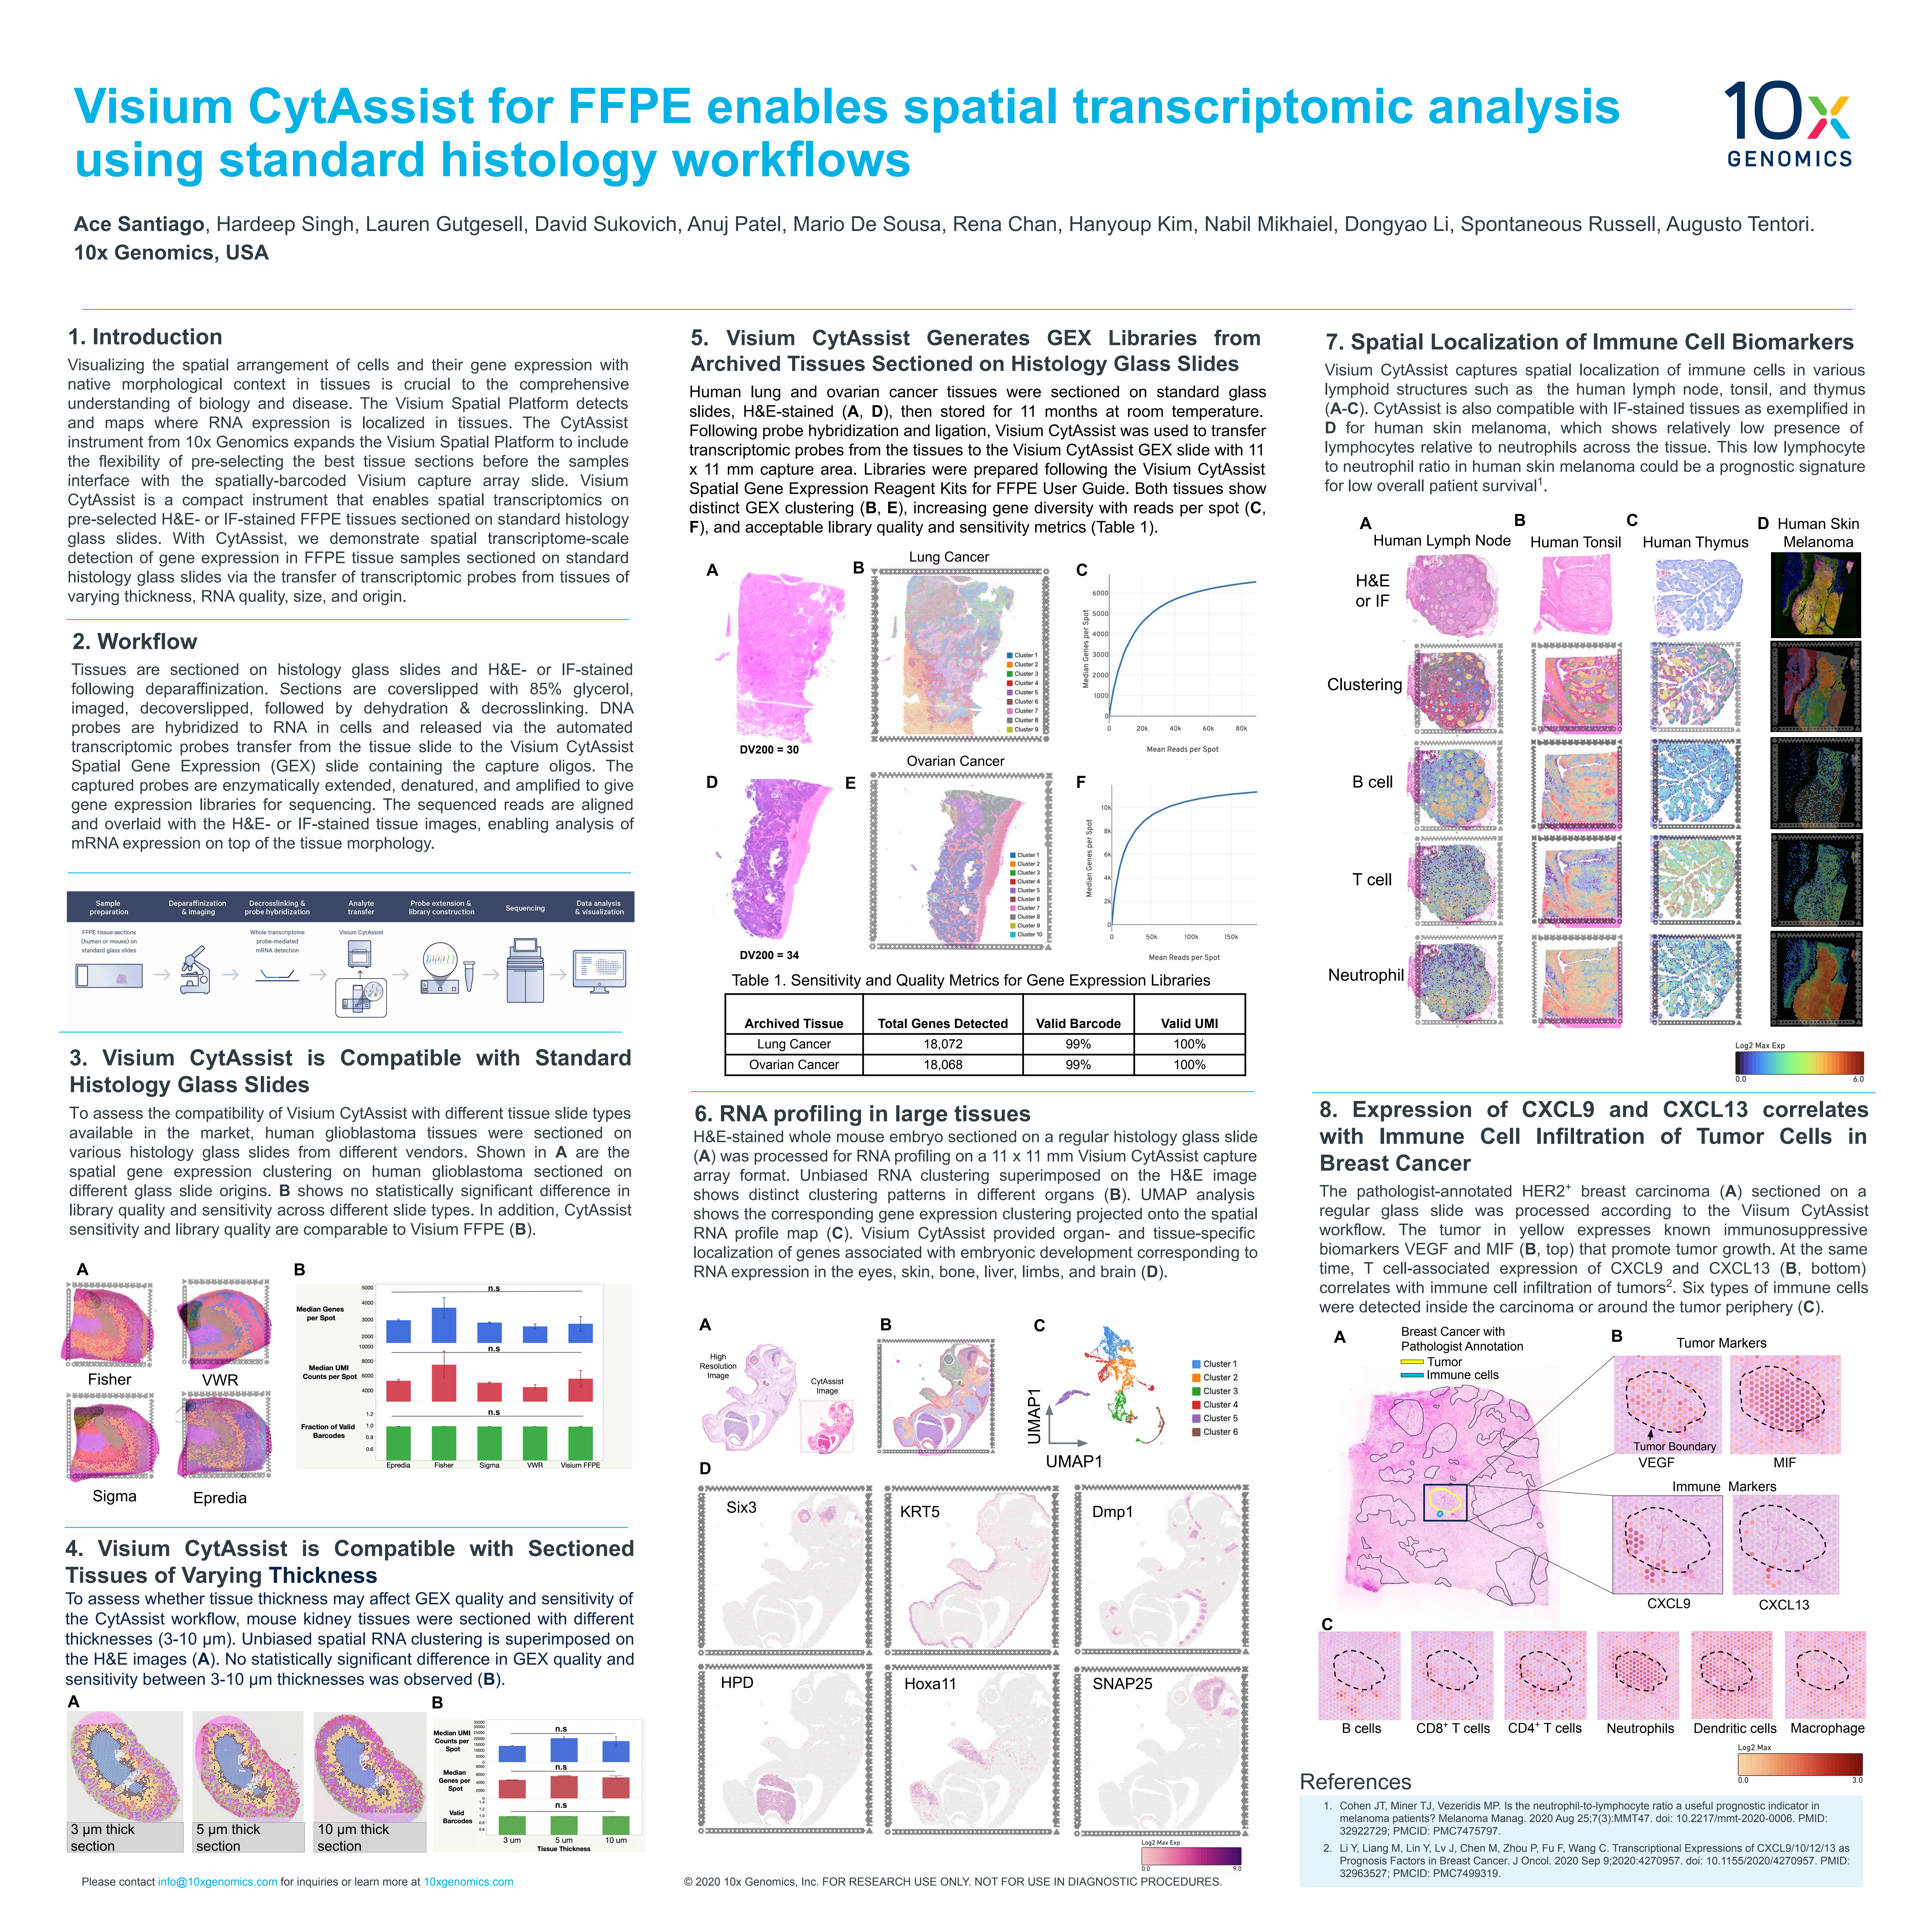 Visium CytAssist for FFPE enables spatial transcriptomic analysis using standard histology workflows